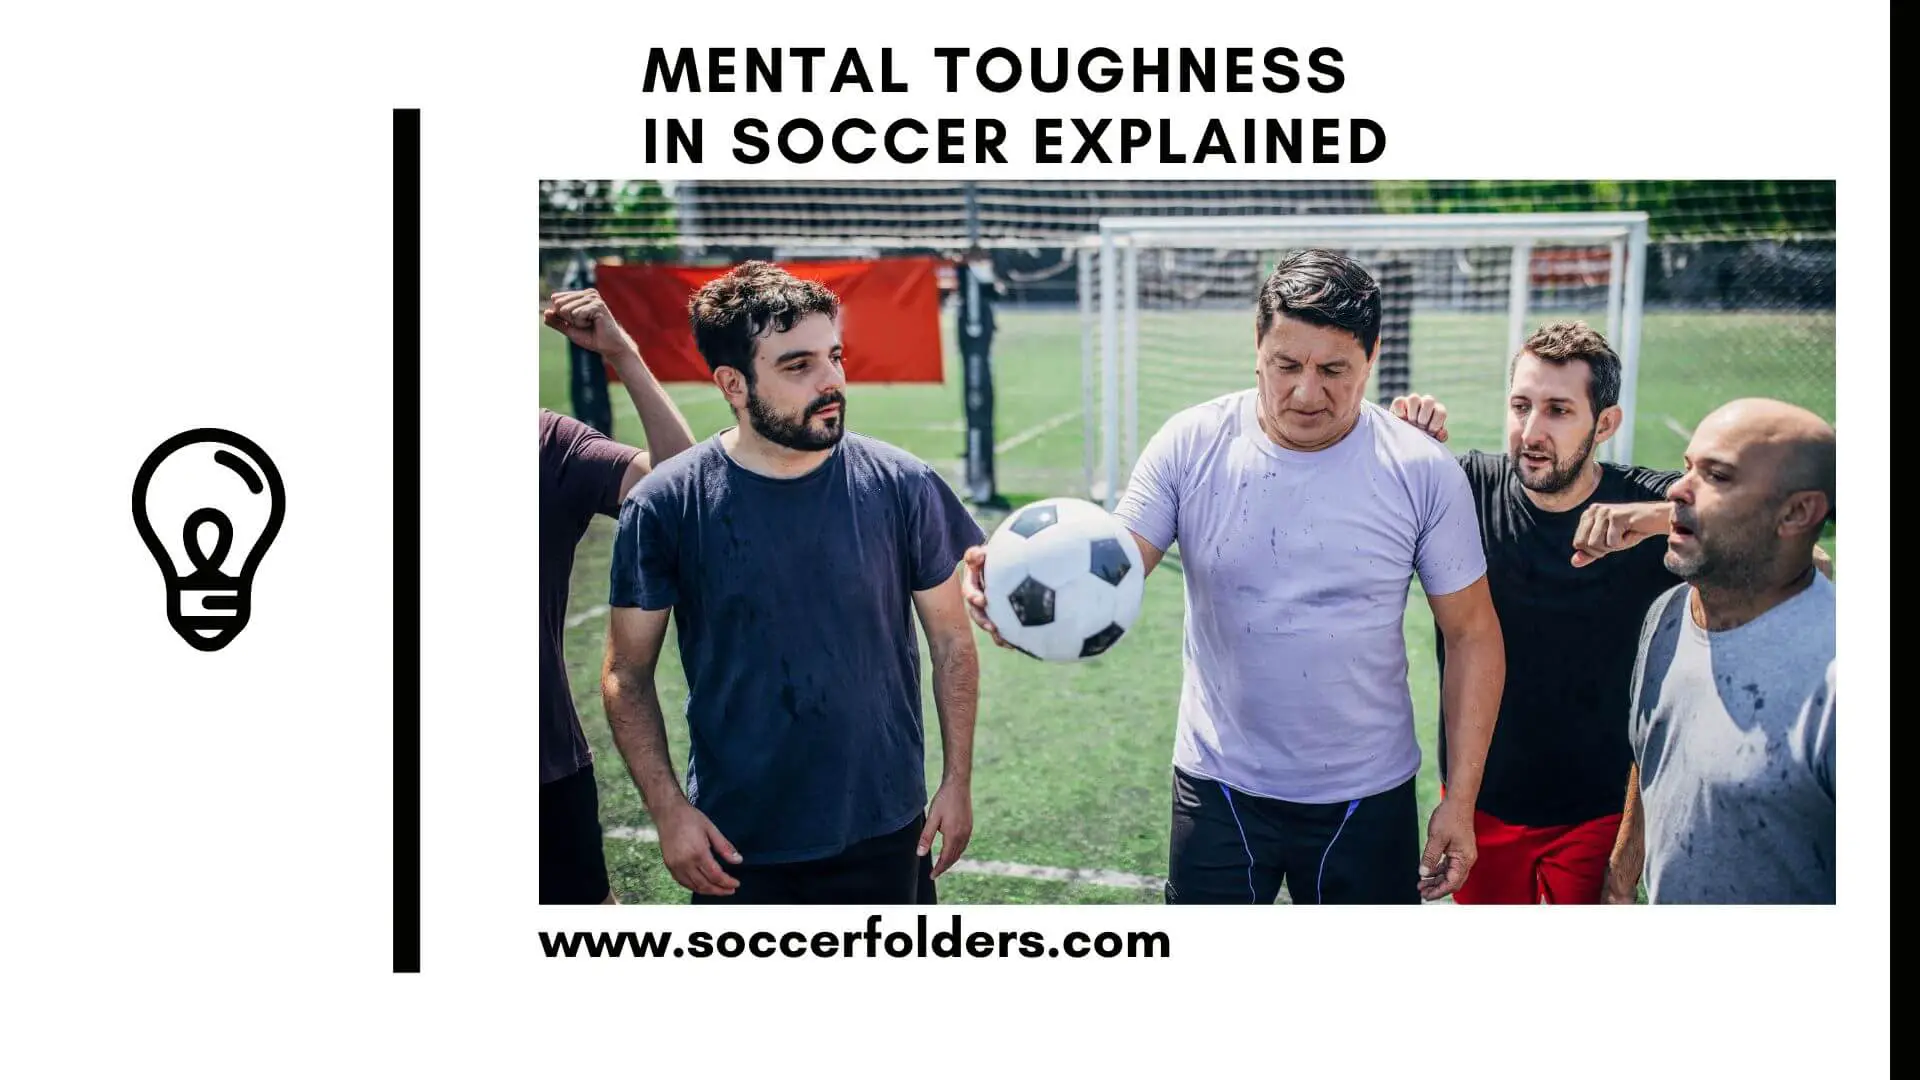 Mental toughness in soccer - Featured Image